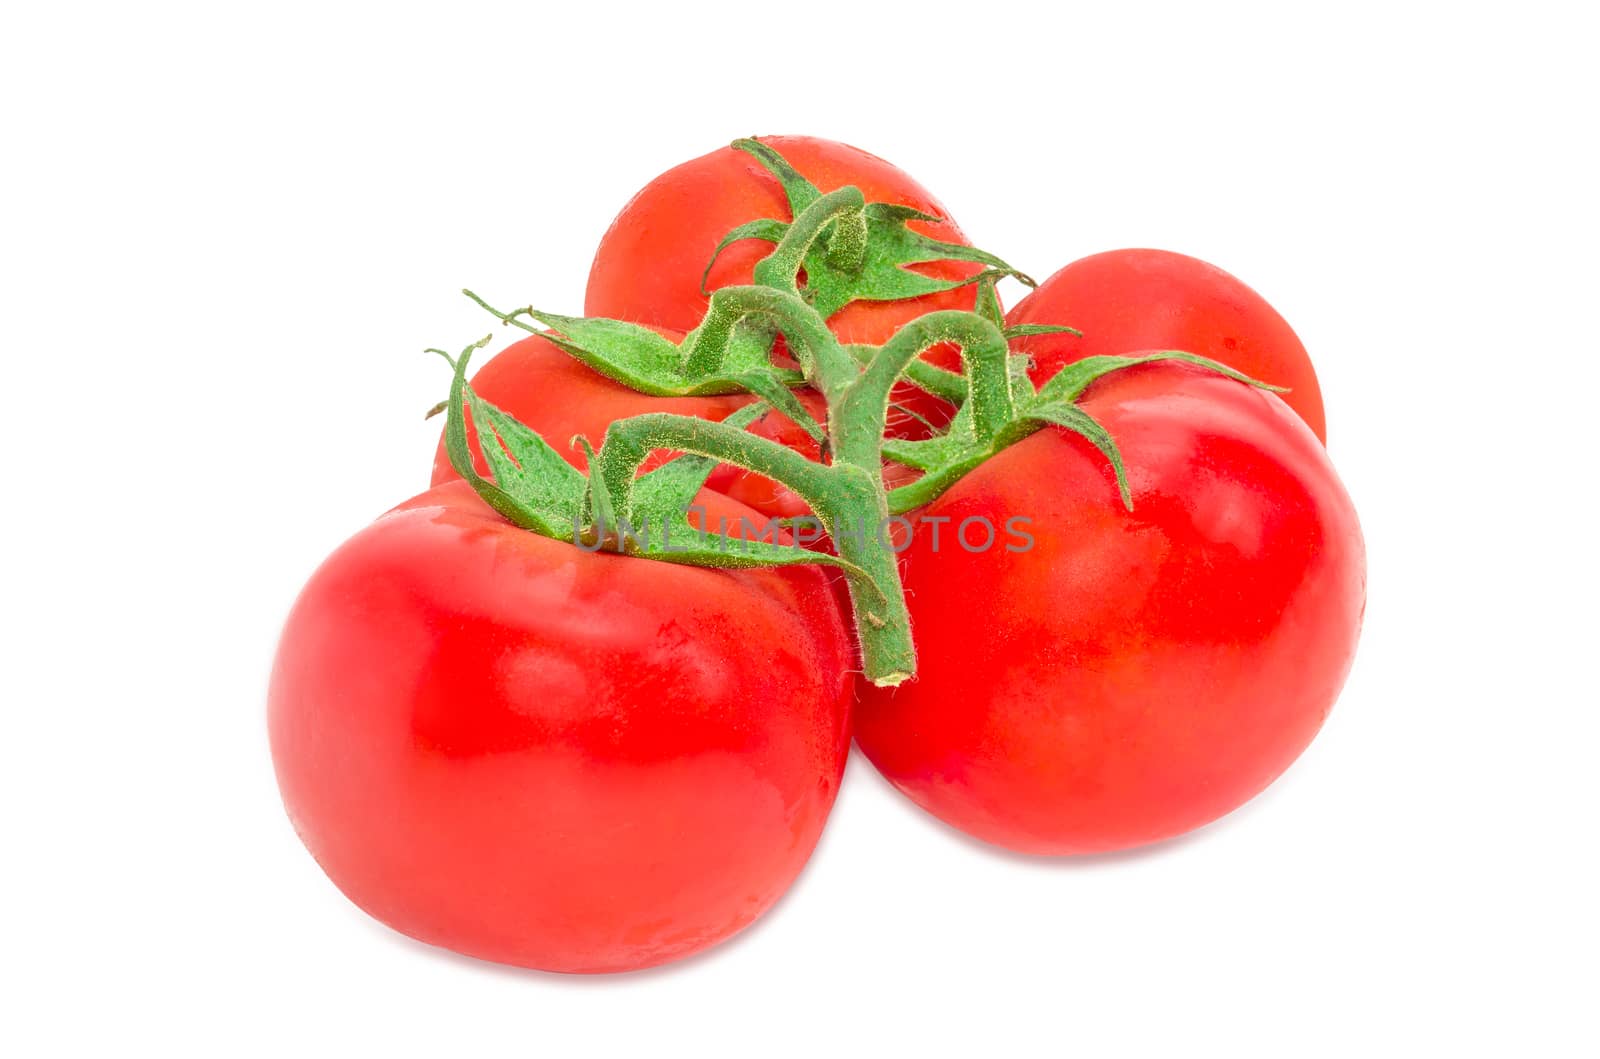 Branch of the ripe red tomatoes with droplets of dew closeup on a light background
